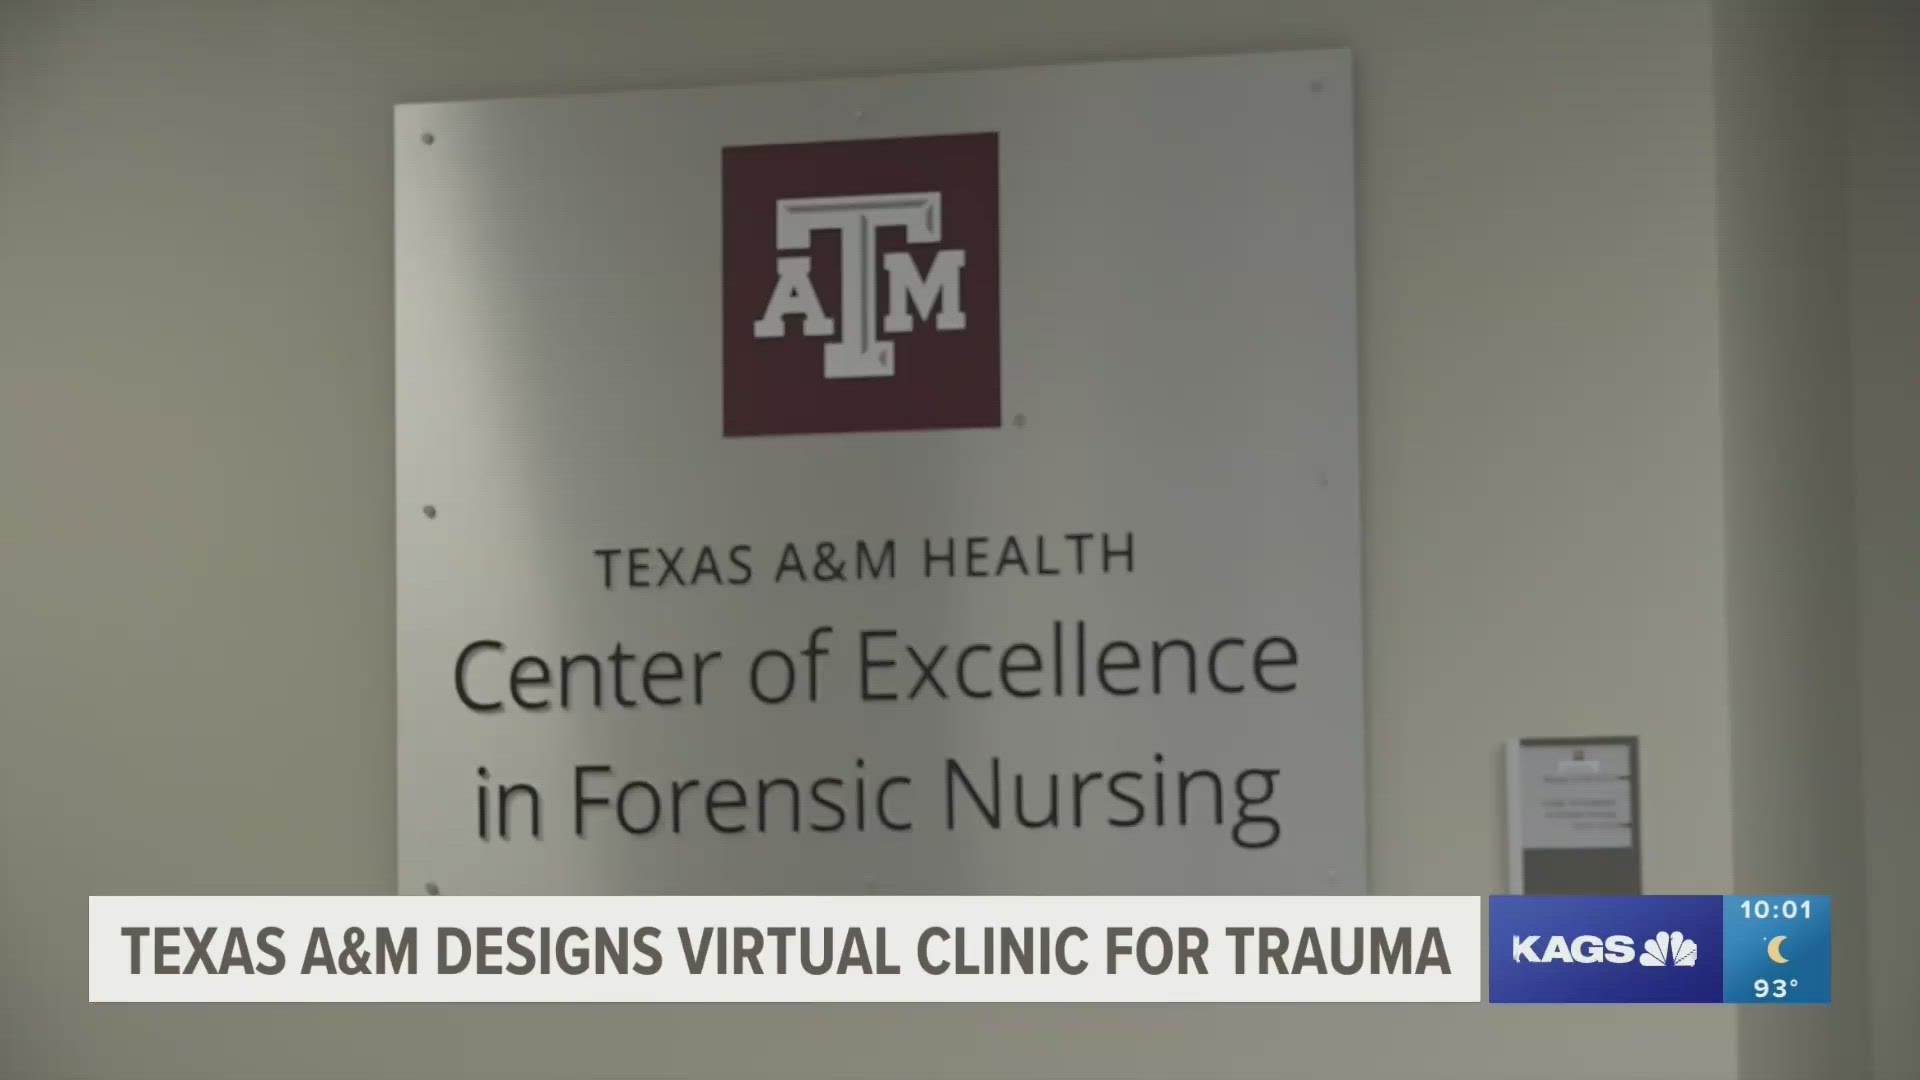 According to Forensic Nursing Director Stacey Mitchell, the team has been working on the clinic for the past year.